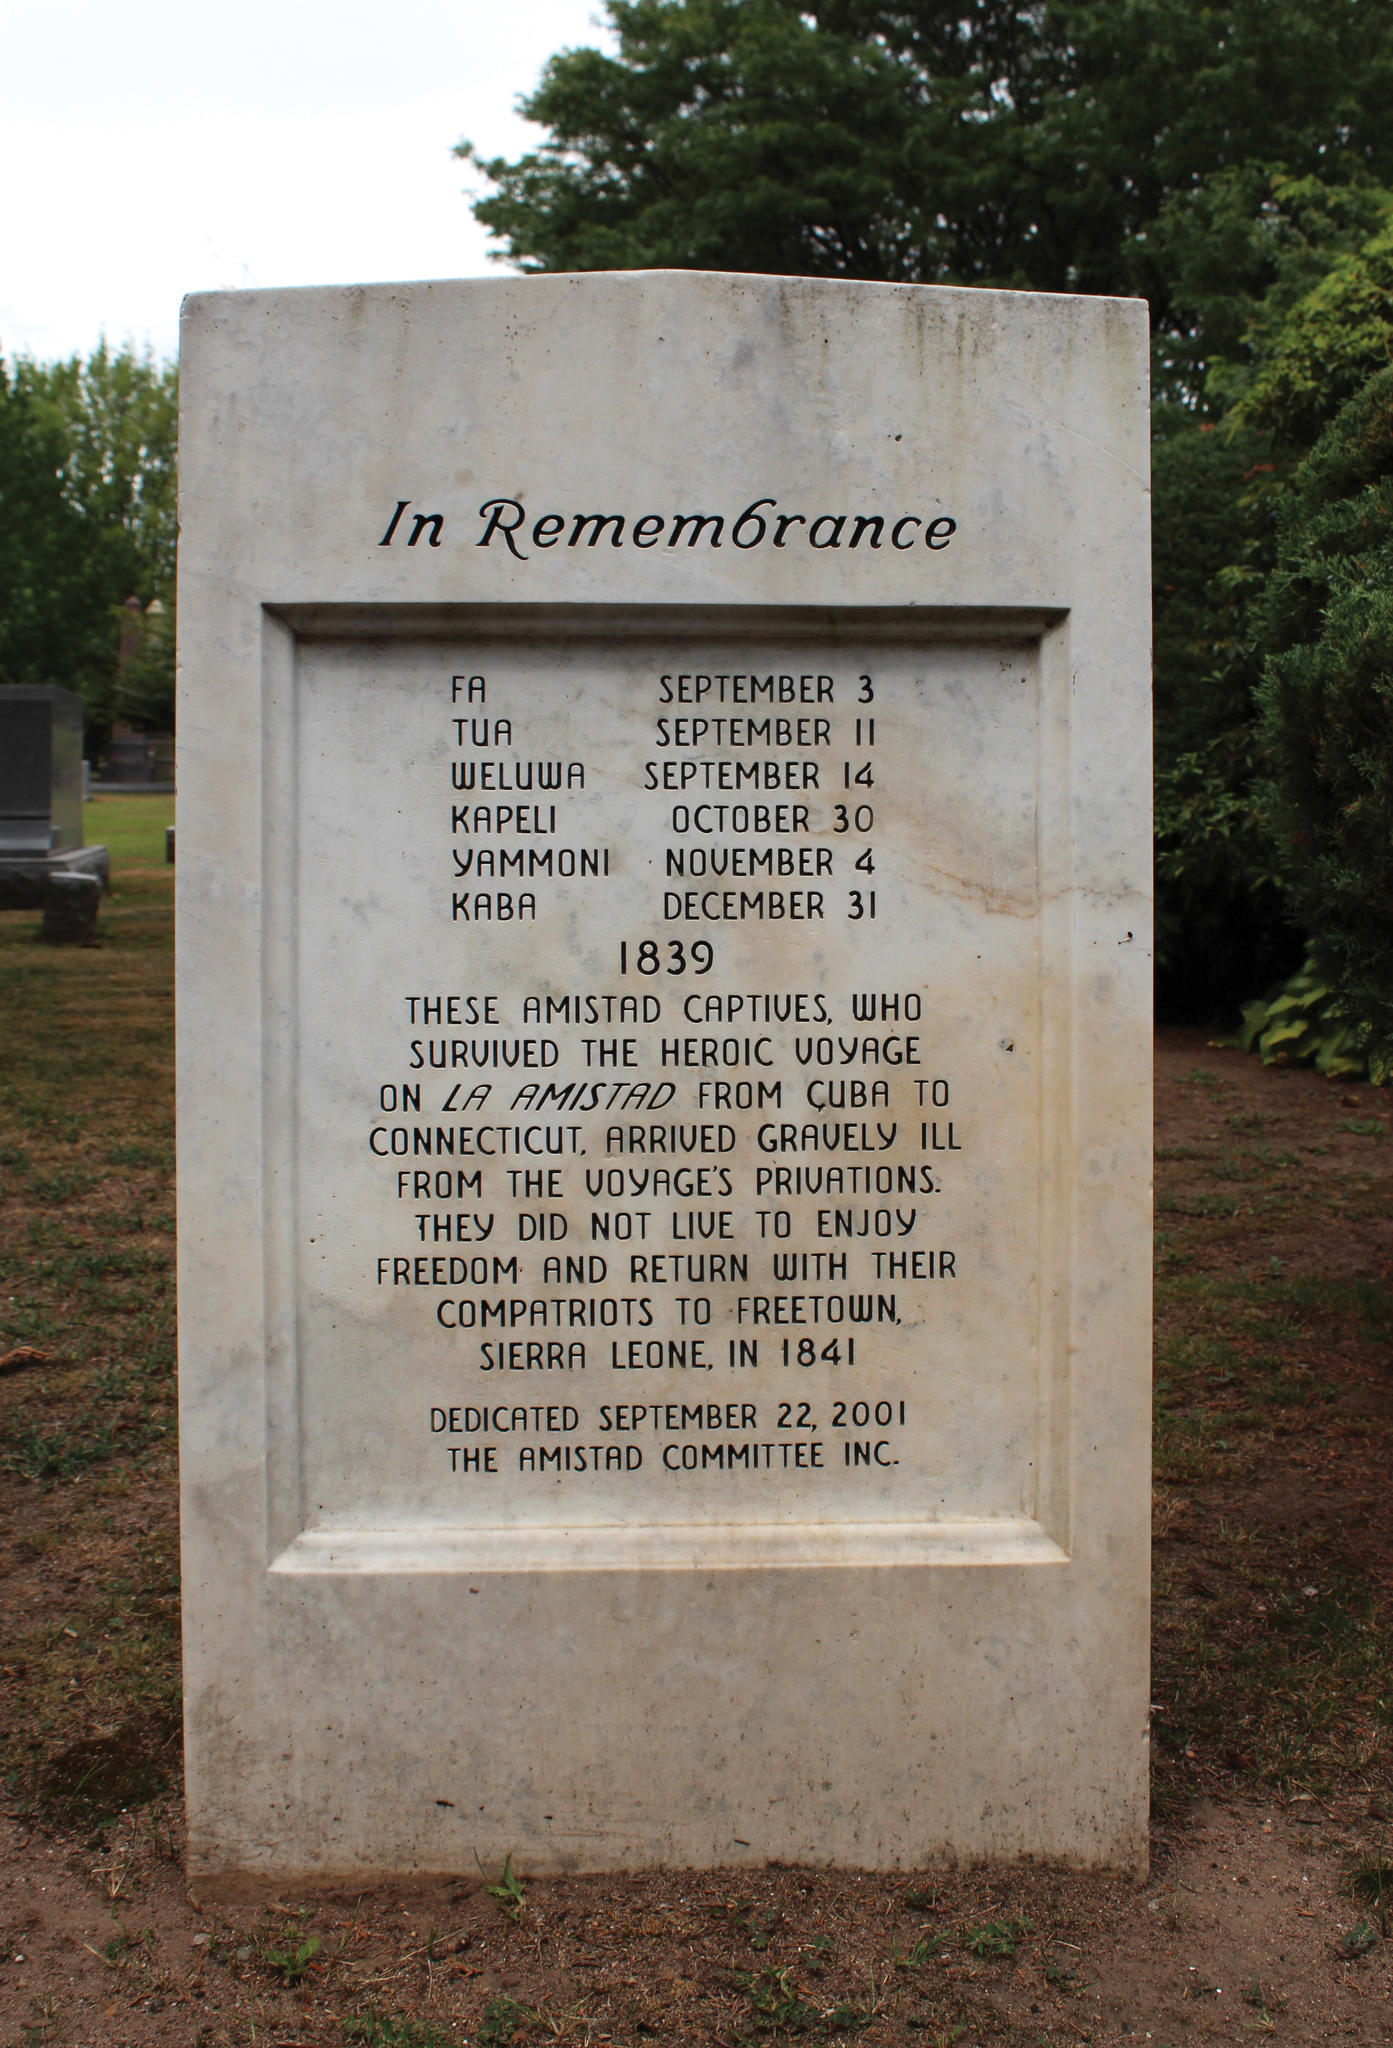 <span style="background-color:transparent">Gravestone honoring the six men of the Amistad buried in the Grove Street Cemetery who died in New Haven, September 3–December 31, 1839: </span><span style="background-color:transparent">Fa,</span><span style="background-color:transparent"> September 3; </span><span style="background-color:transparent">Tua,</span><span style="background-color:transparent"> September 11; </span><span style="background-color:transparent">We-lu-wa,</span><span style="background-color:transparent"> September 14; </span><span style="background-color:transparent">Ka-pe-li,</span><span style="background-color:transparent"> October 30; </span><span style="background-color:transparent">Yam-mo-ni,</span><span style="background-color:transparent"> November 4; and </span><span style="background-color:transparent">Ka-ba,</span><span style="background-color:transparent"> December 31.</span><span style="background-color:transparent"> </span><span><span style="background-color:transparent">Location: B Magnolia</span></span> 